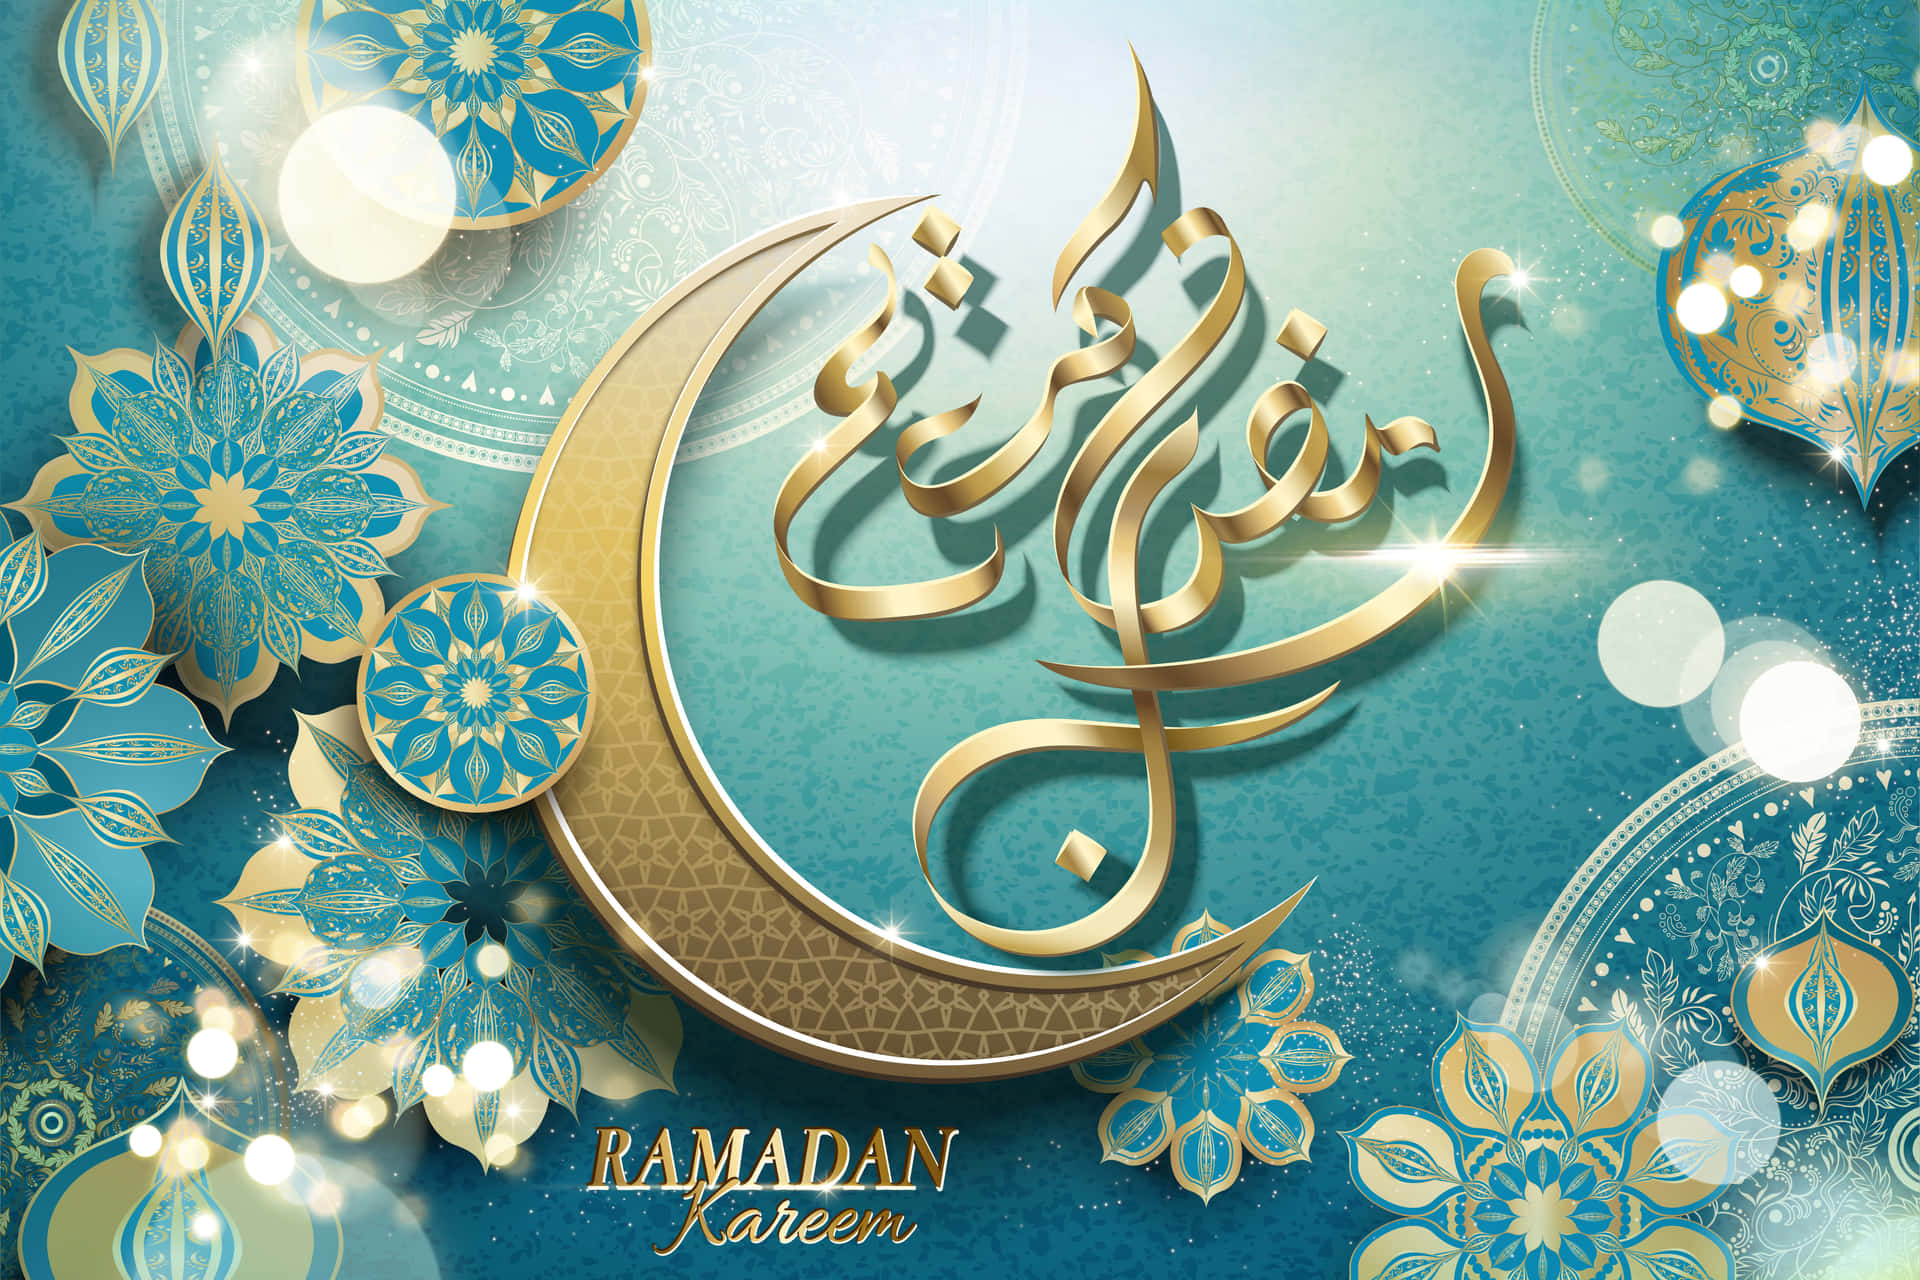 Celebrate Ramadan with your loved ones